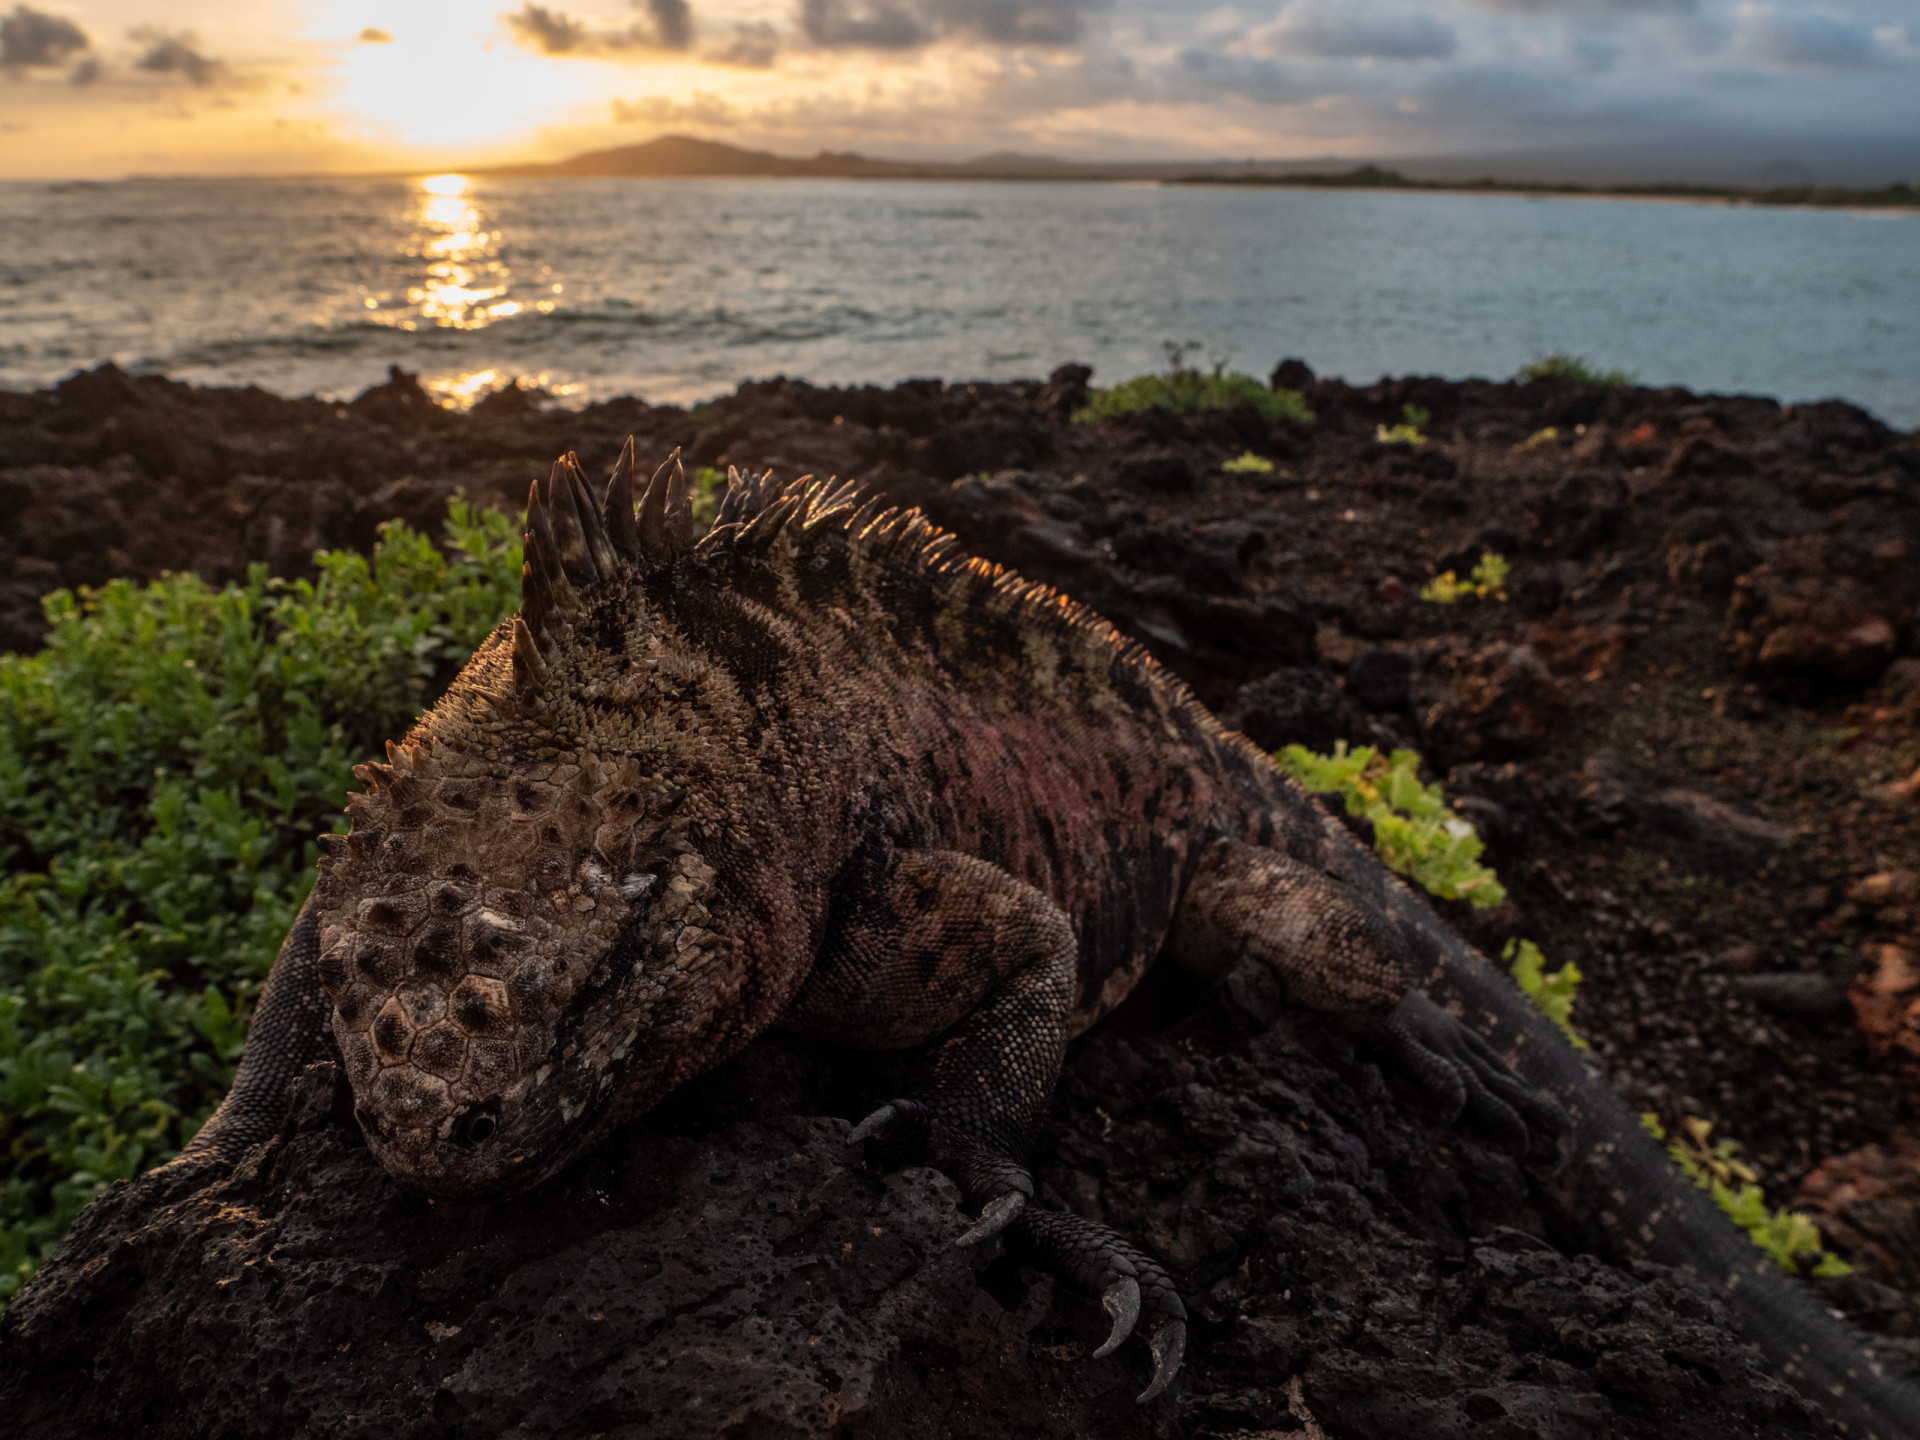 <p>The Journey to Nature's Edge expedition is a once-in-a-lifetime trip for anyone with a spare US$1.4 million. Taking place across 111 days and 12 countries, you will view some of the world’s most vulnerable species, including the Galápagos' marine iguana.</p><p>You may also like:<a href="https://www.starsinsider.com/n/409924?utm_source=msn.com&utm_medium=display&utm_campaign=referral_description&utm_content=555492en-us"> Which countries have the best English language skills?</a></p>